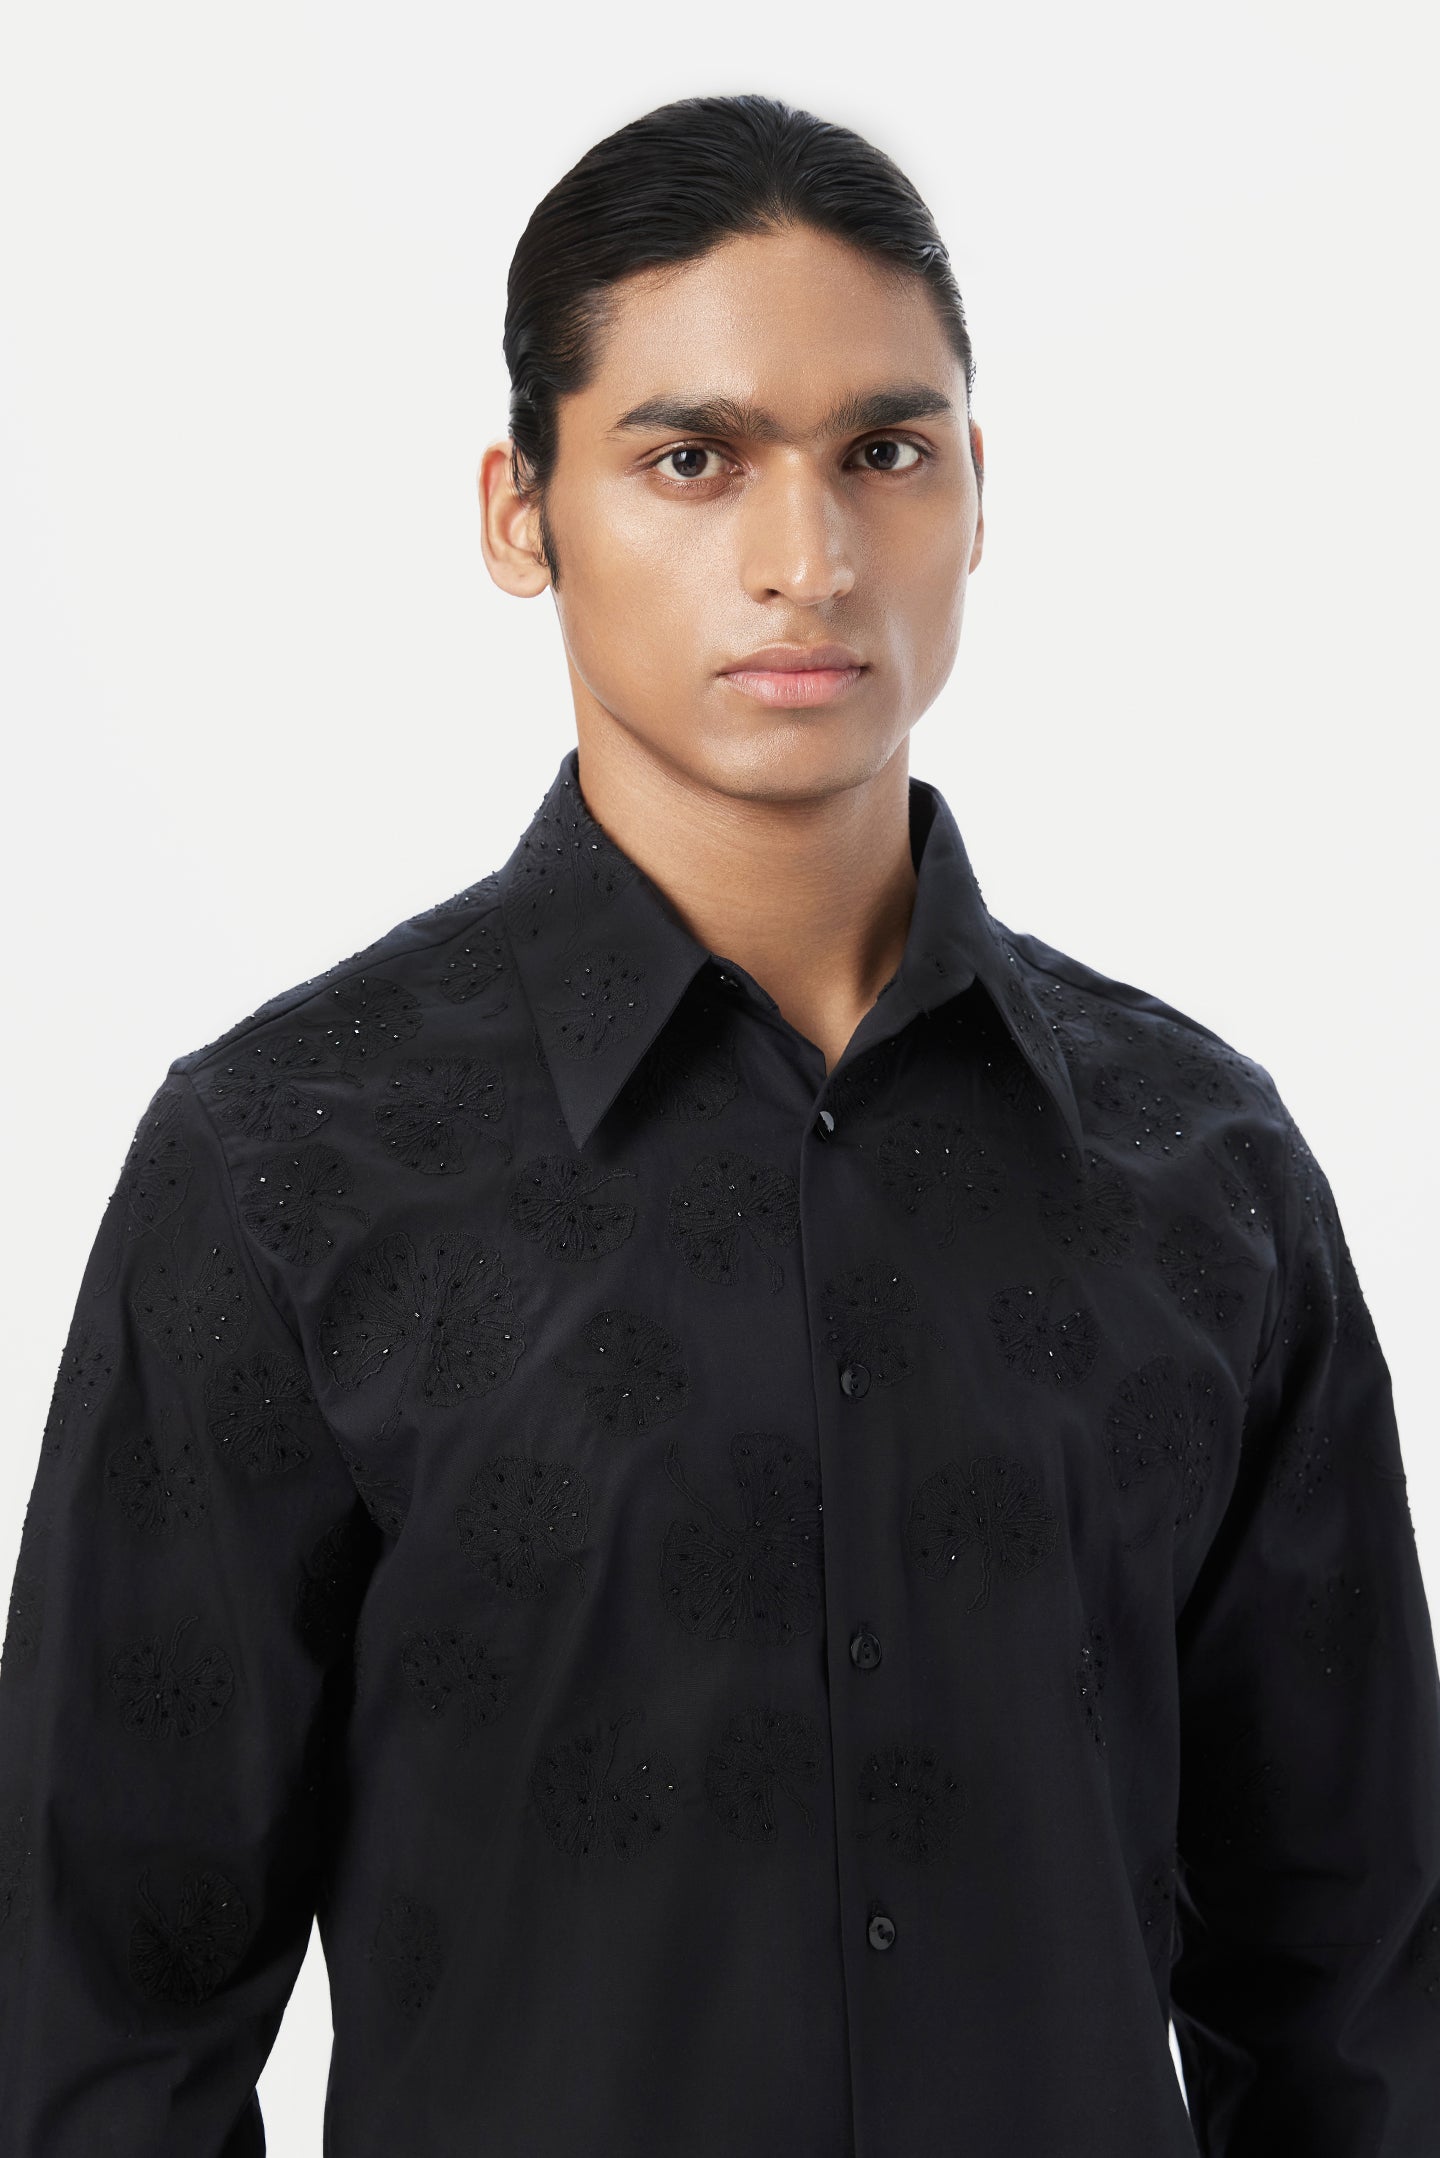 Regular Fit Button-Down Shirt with Gingko Thread Embroidery